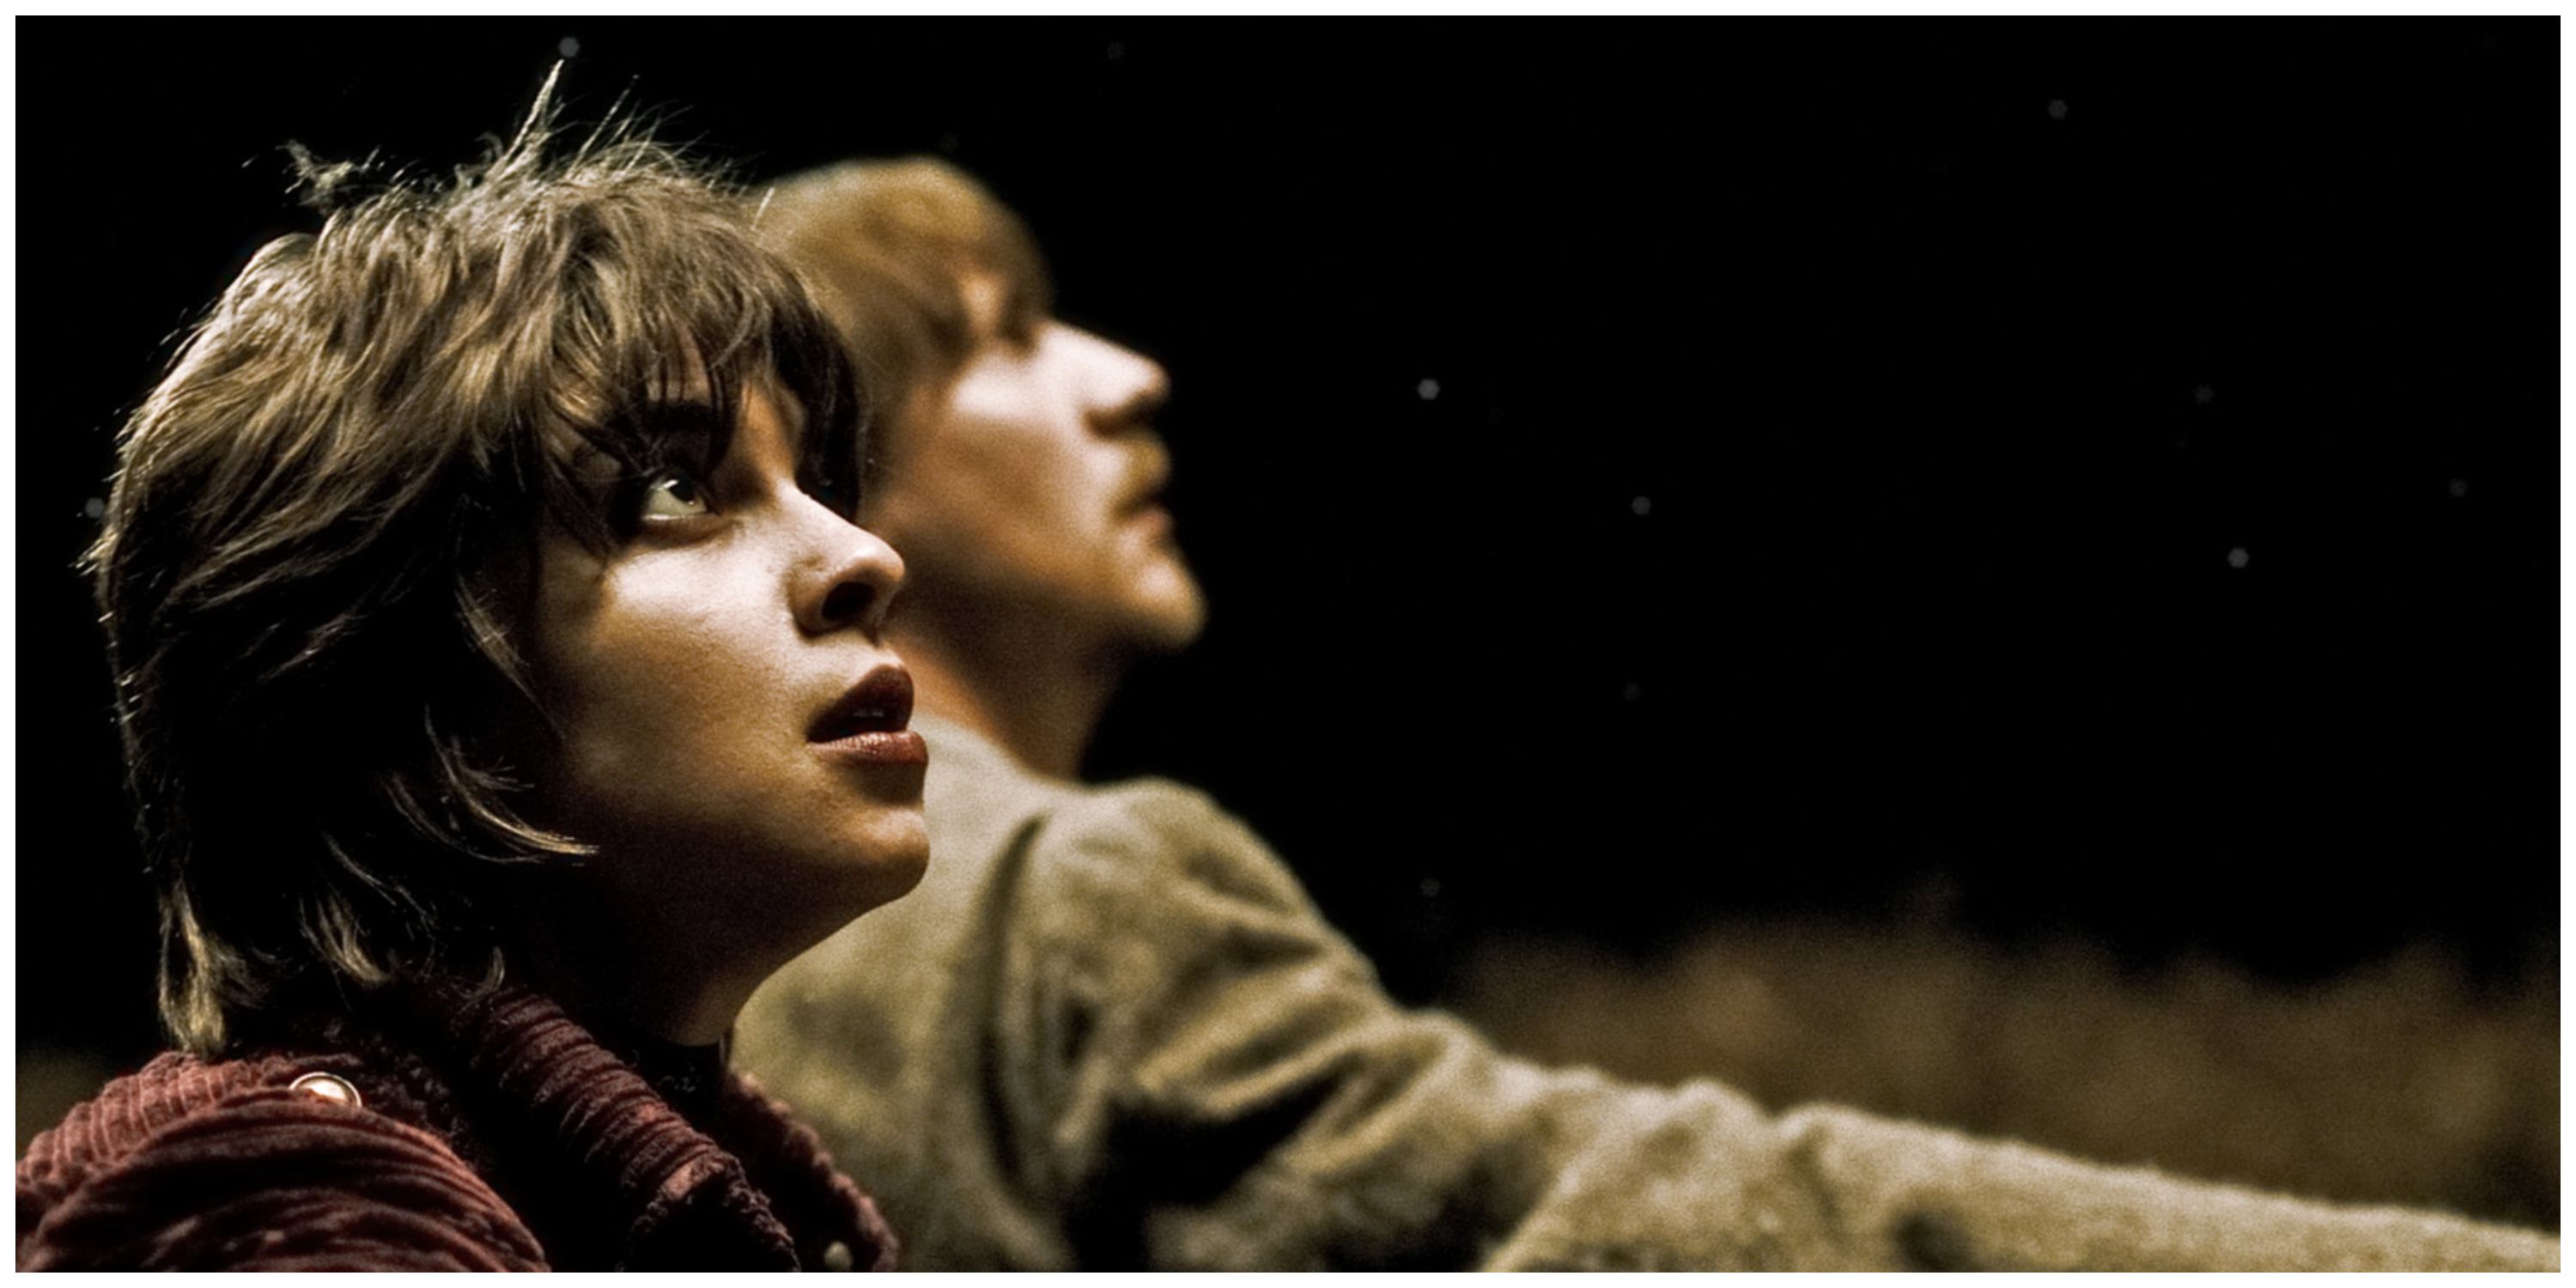 Remus Lupin and Tonks in Harry Potter and The Deathly Hallows Part 1